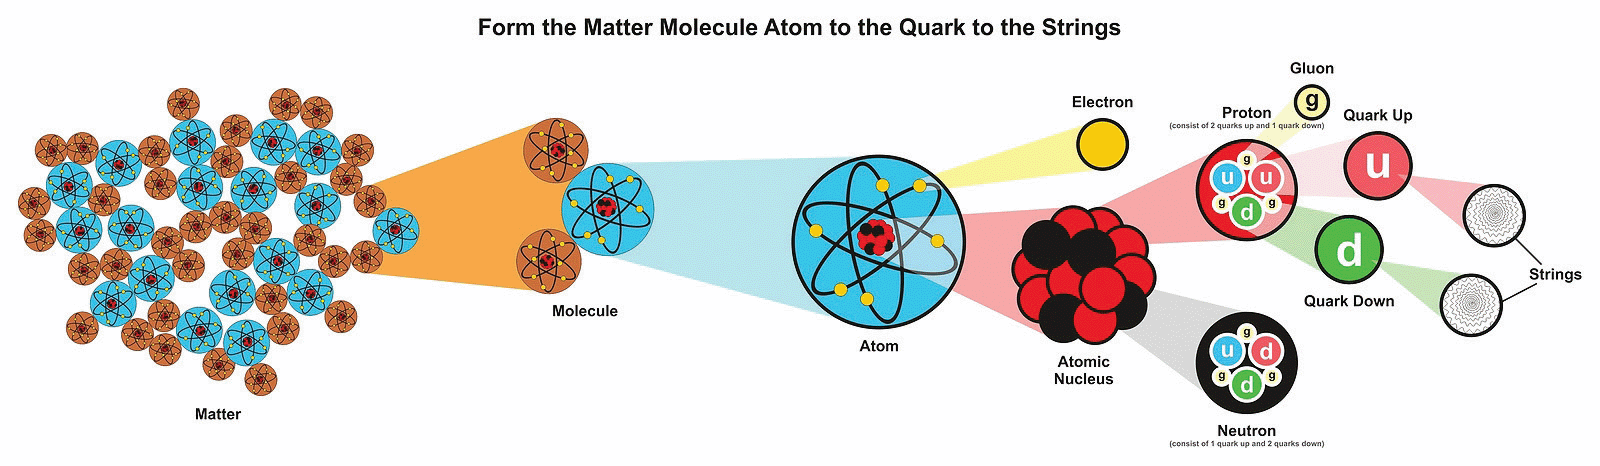 Form the matter molecule atom to the quarks to the strings infographic diagram showing the smallest particles discovered so far for physics science education
.